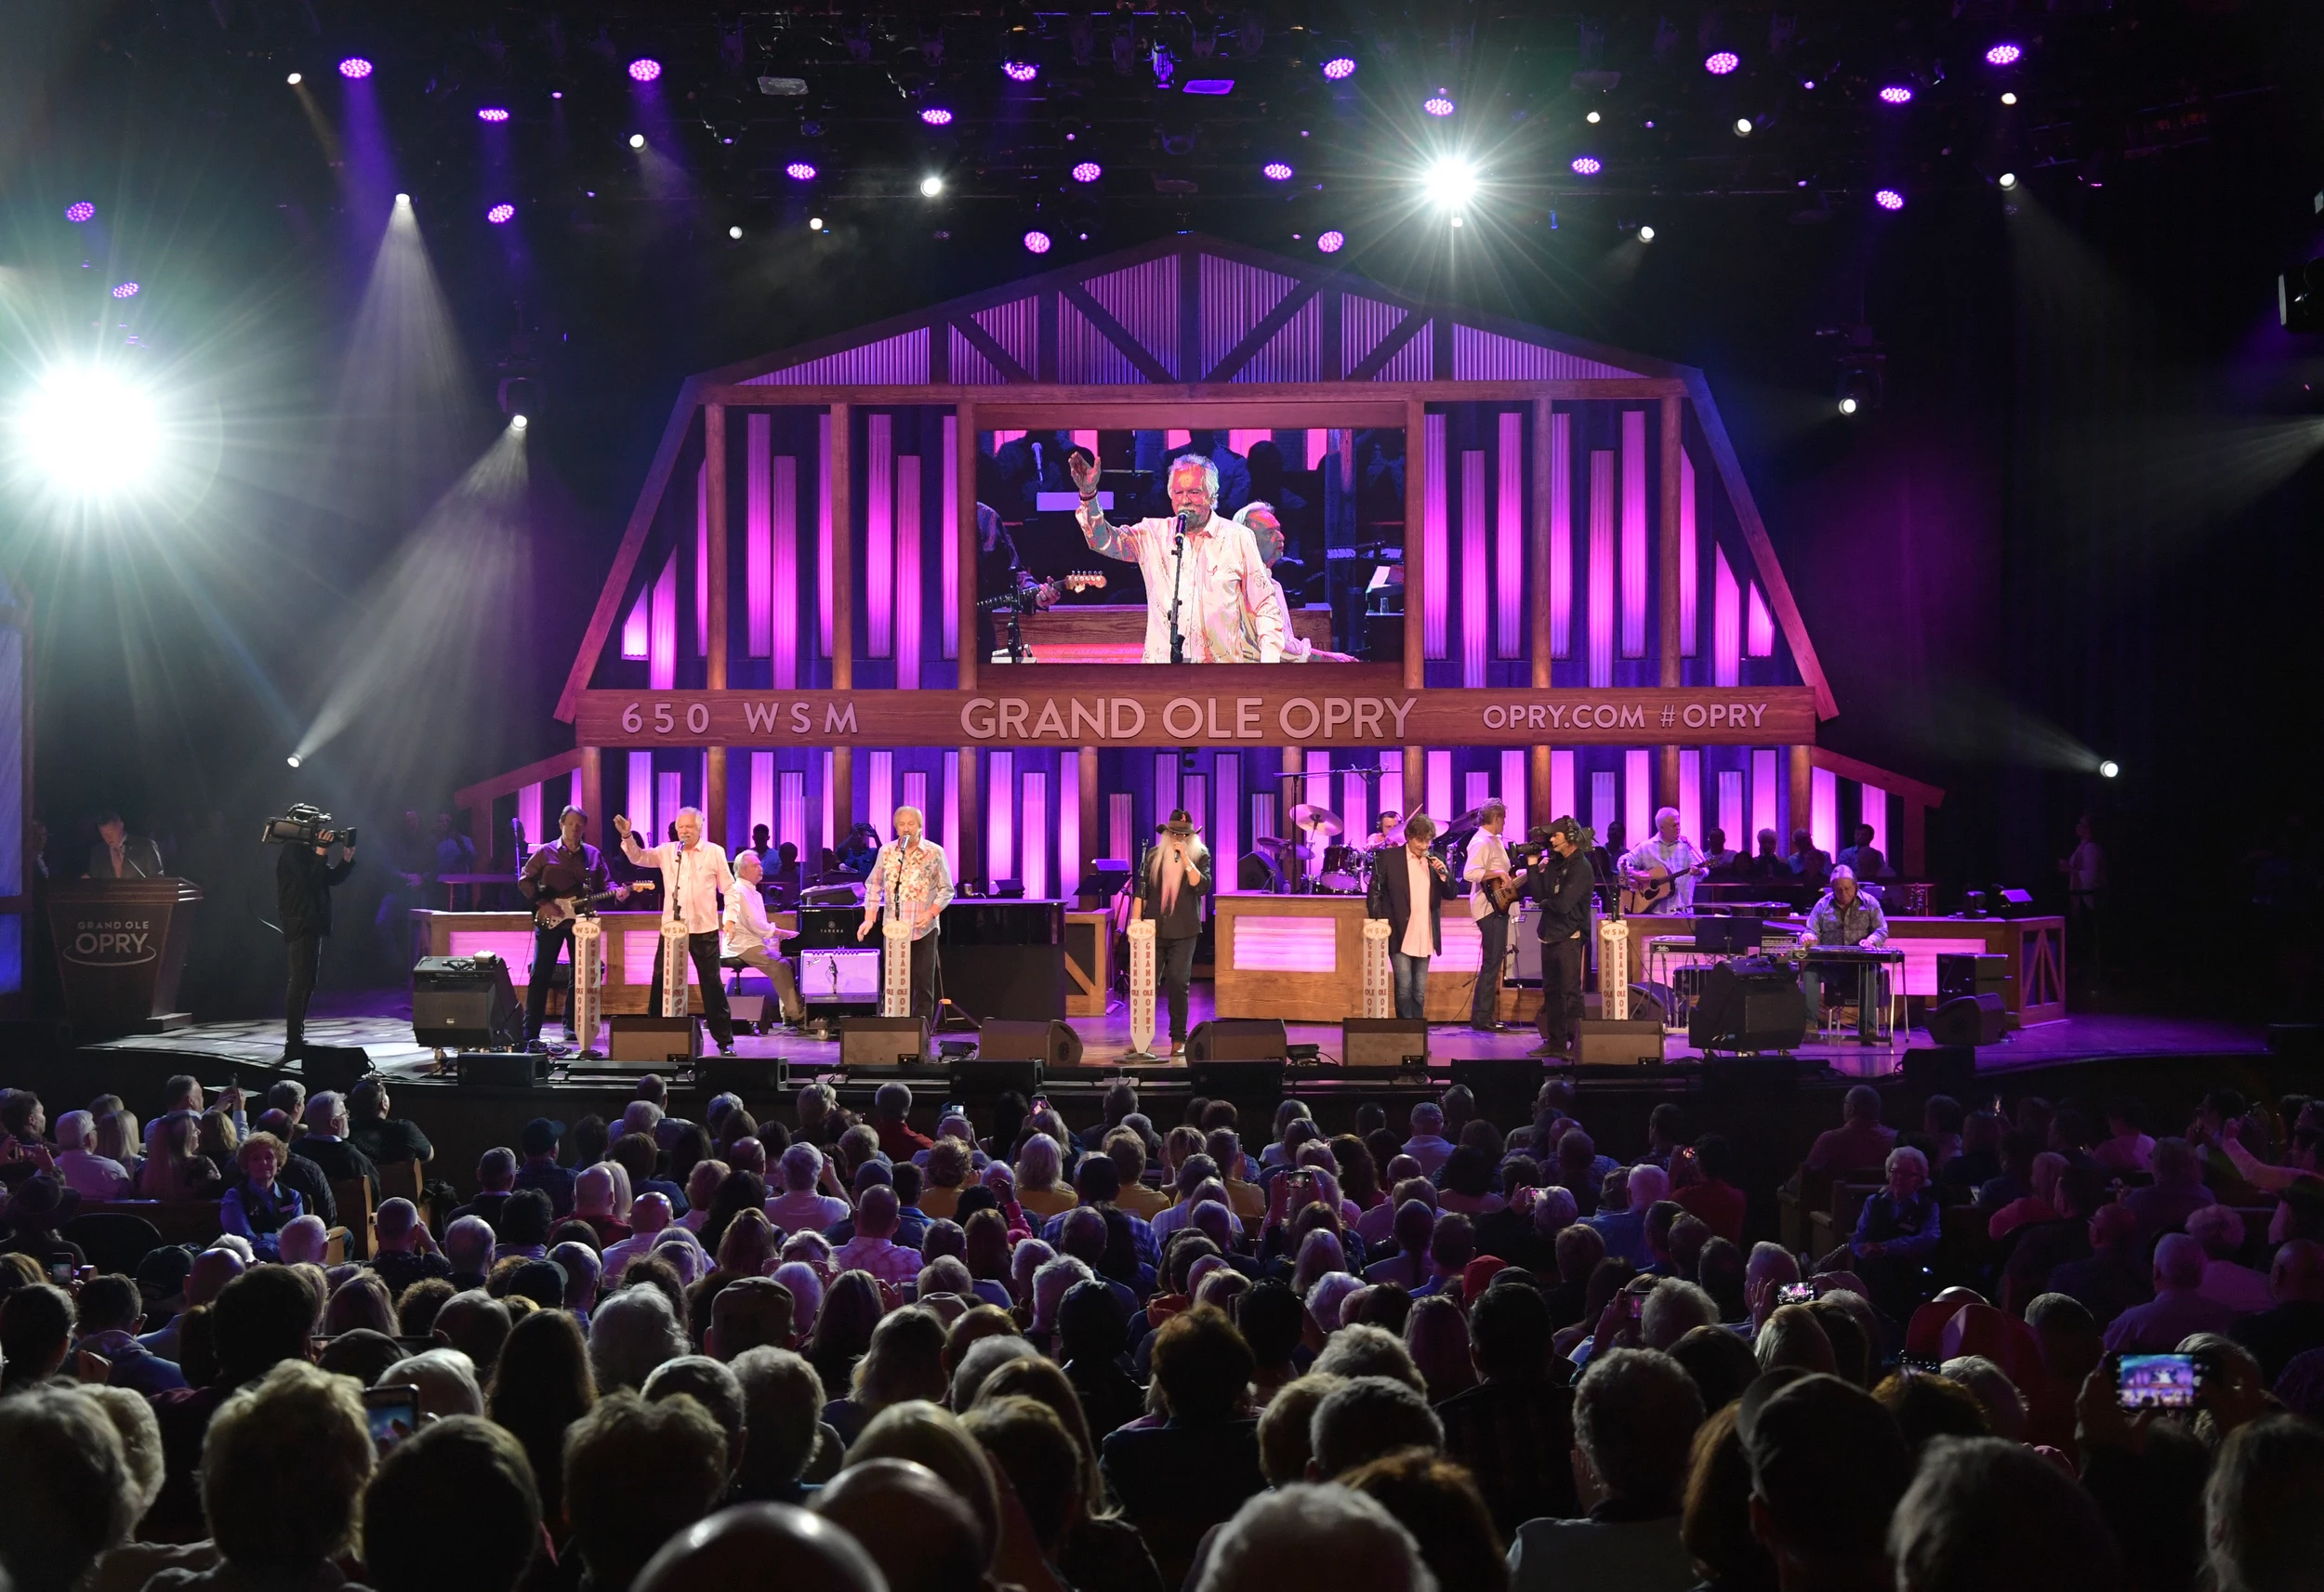 10 Grand Ole Opry Facts You Might Not Know (Yet) Kowaliga Country 97.5